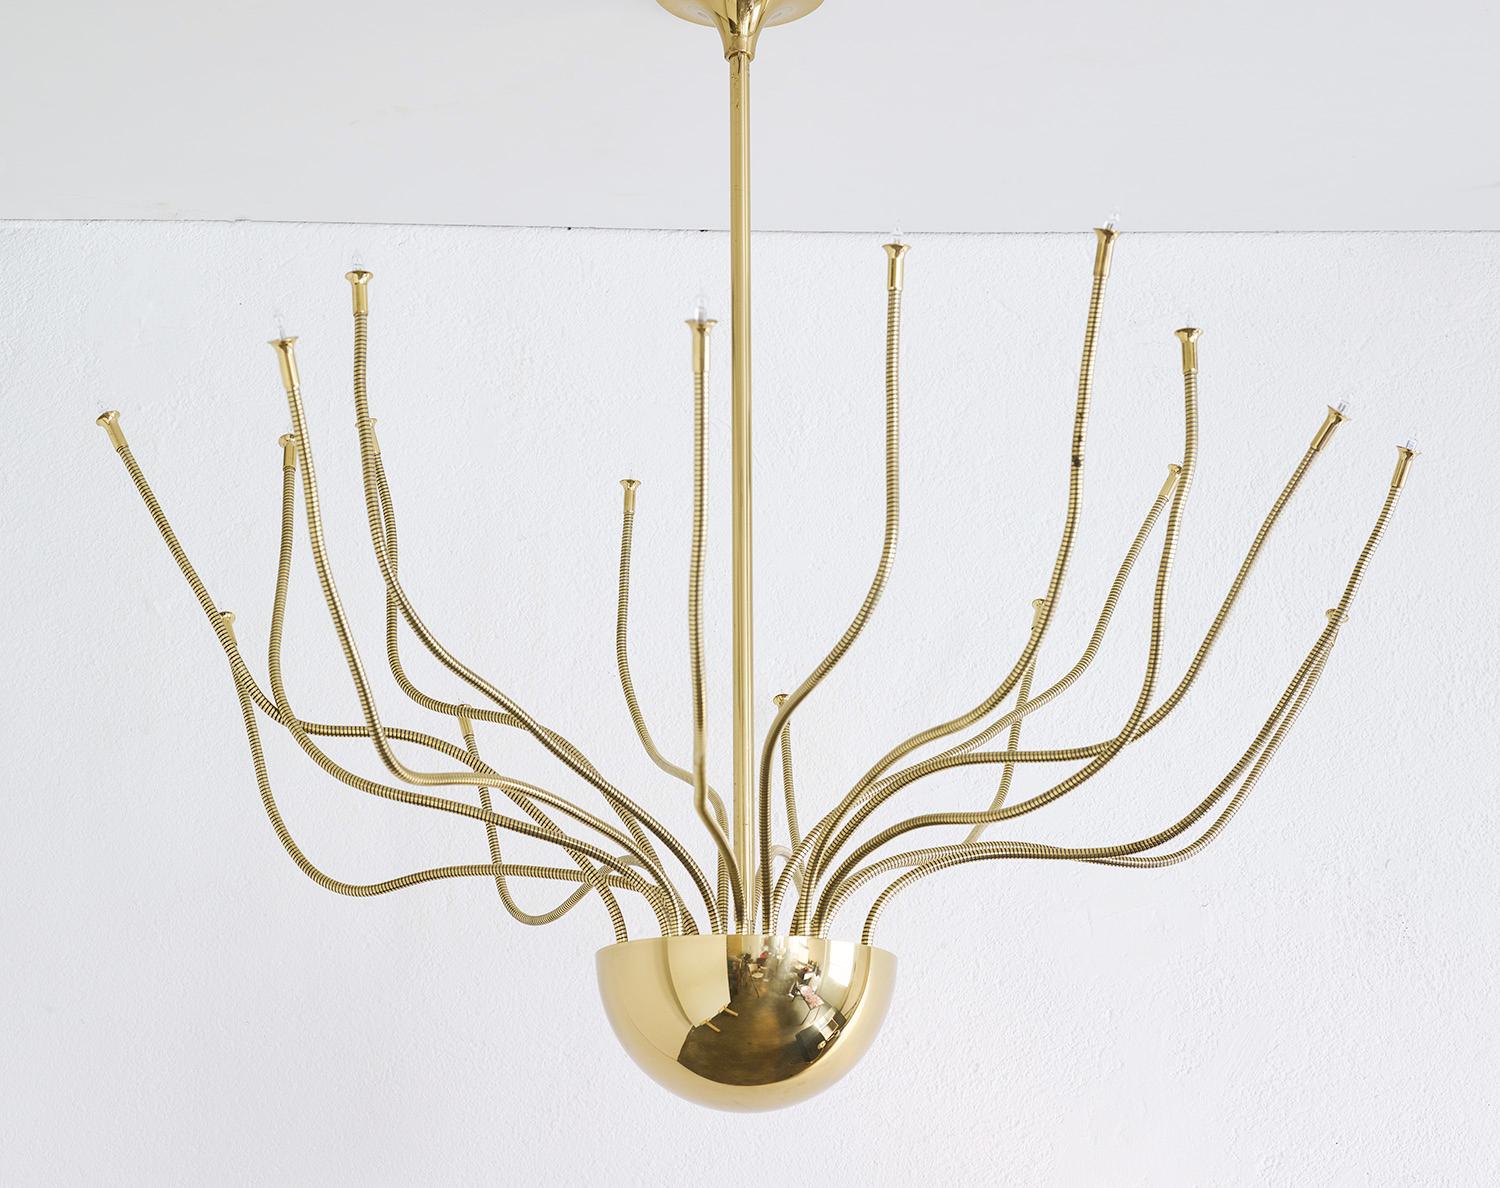 Impressive Medusa ceiling light by Florian Schulz, Germany, 1980

The Medusa is a spectacular ceiling light by German lighting designer Florian Schulz well known by decorators around the world for his elegant brass suspension and ceiling lamps.

The